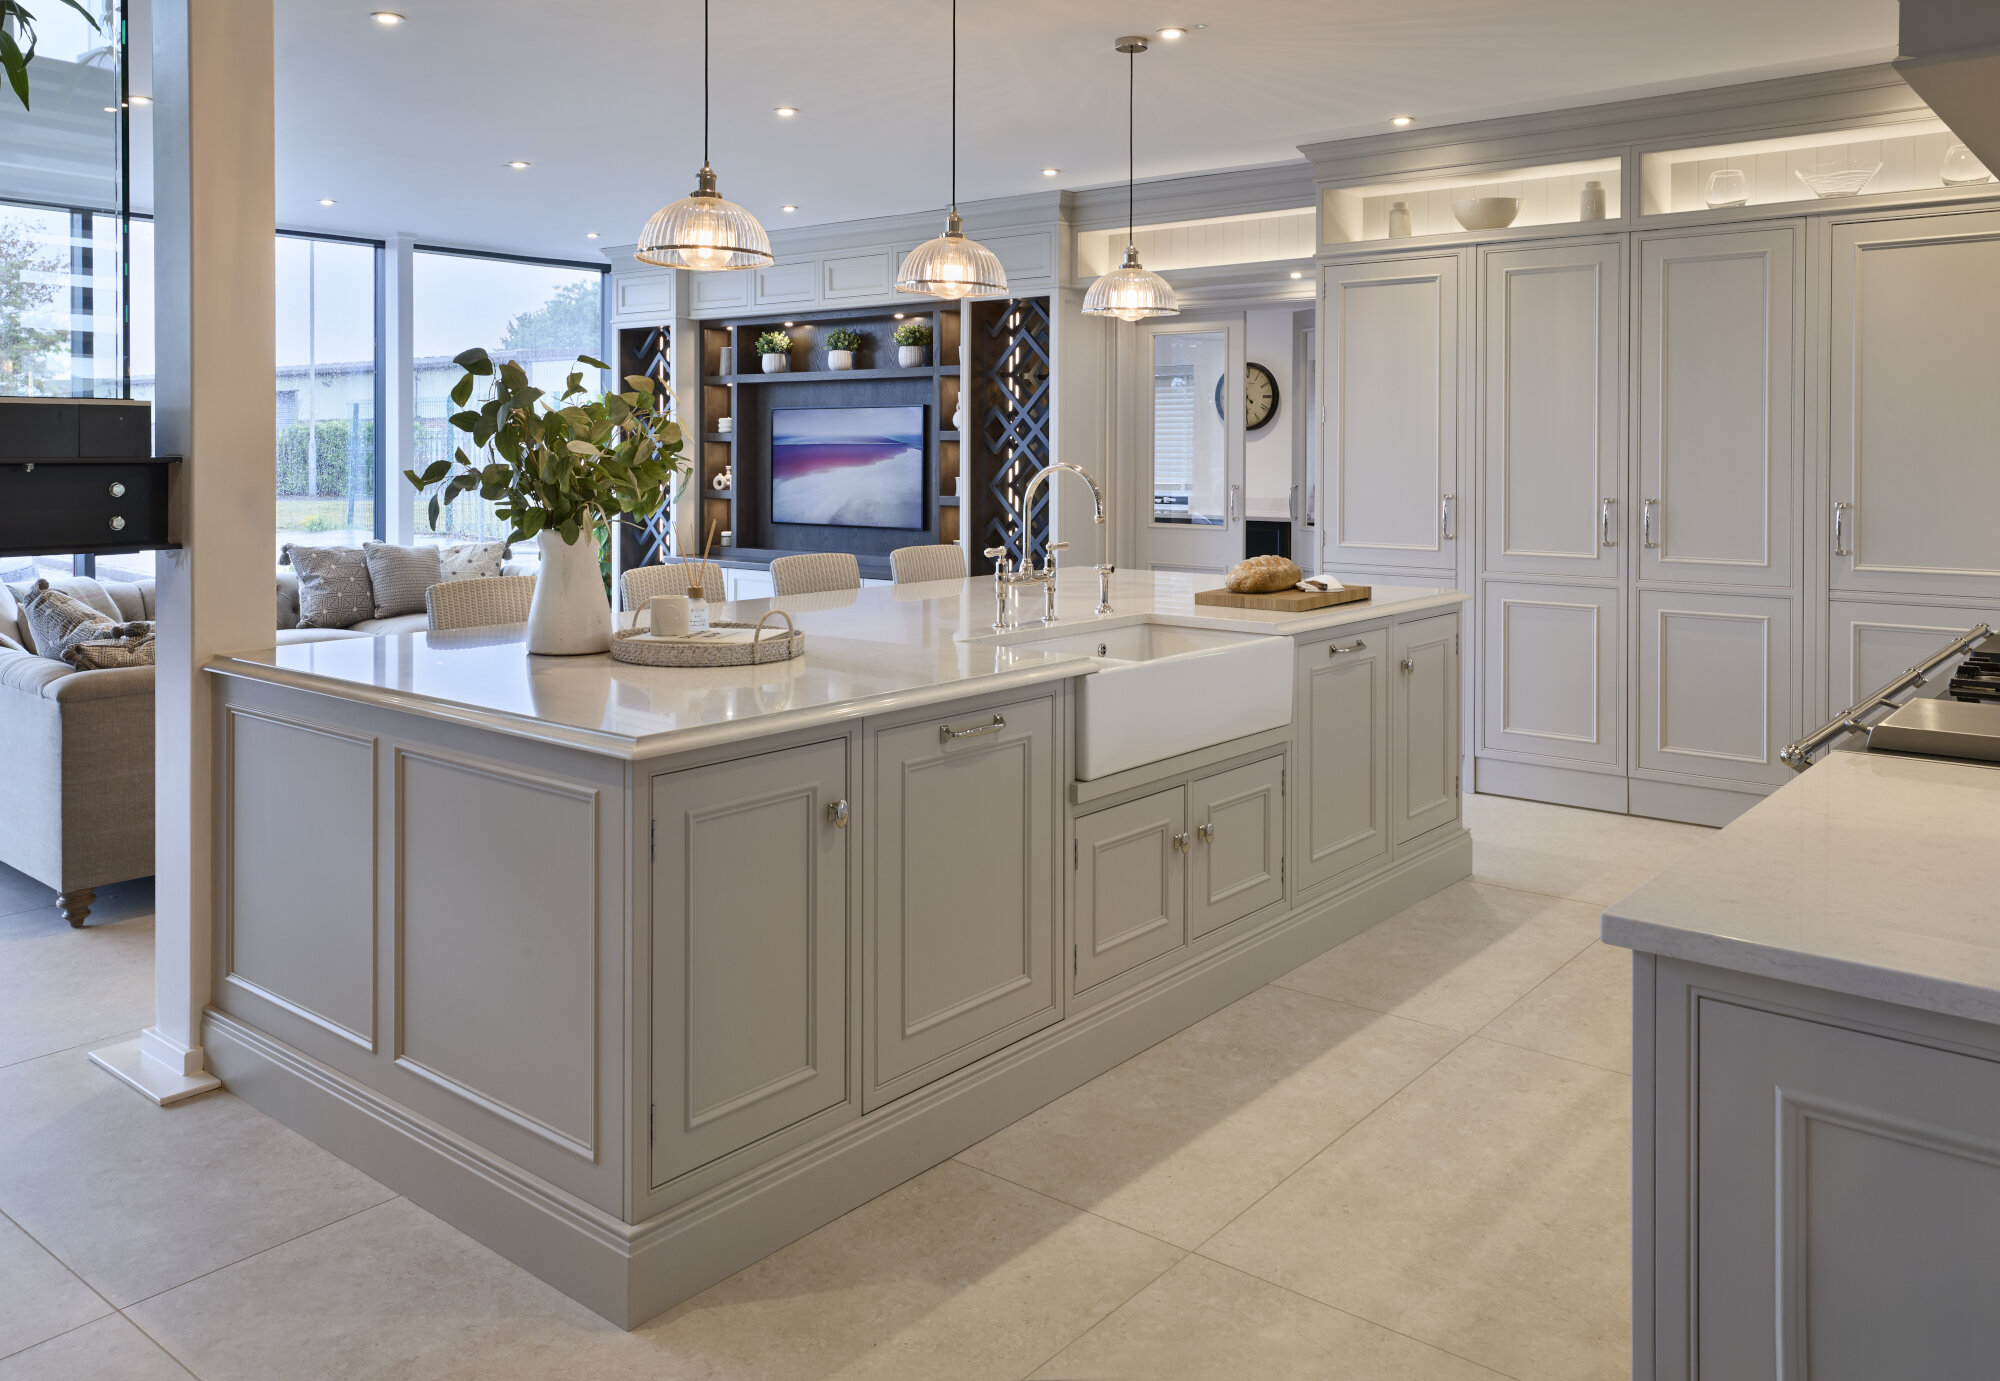 This Bespoke Kitchen Design is on display in our showroom near Crowland